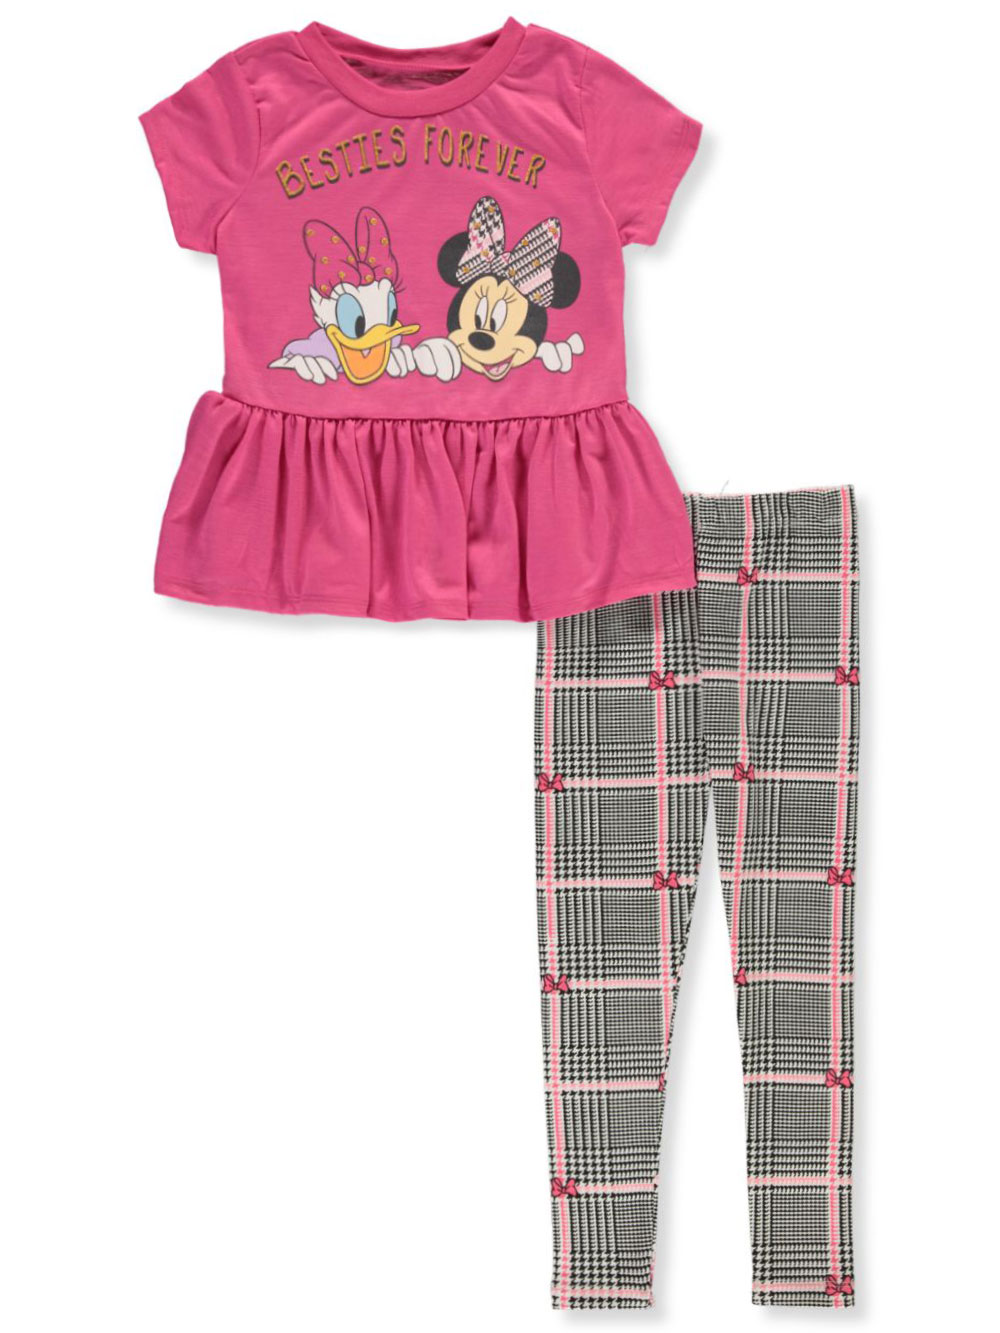 Size 6x Pant Sets for Girls